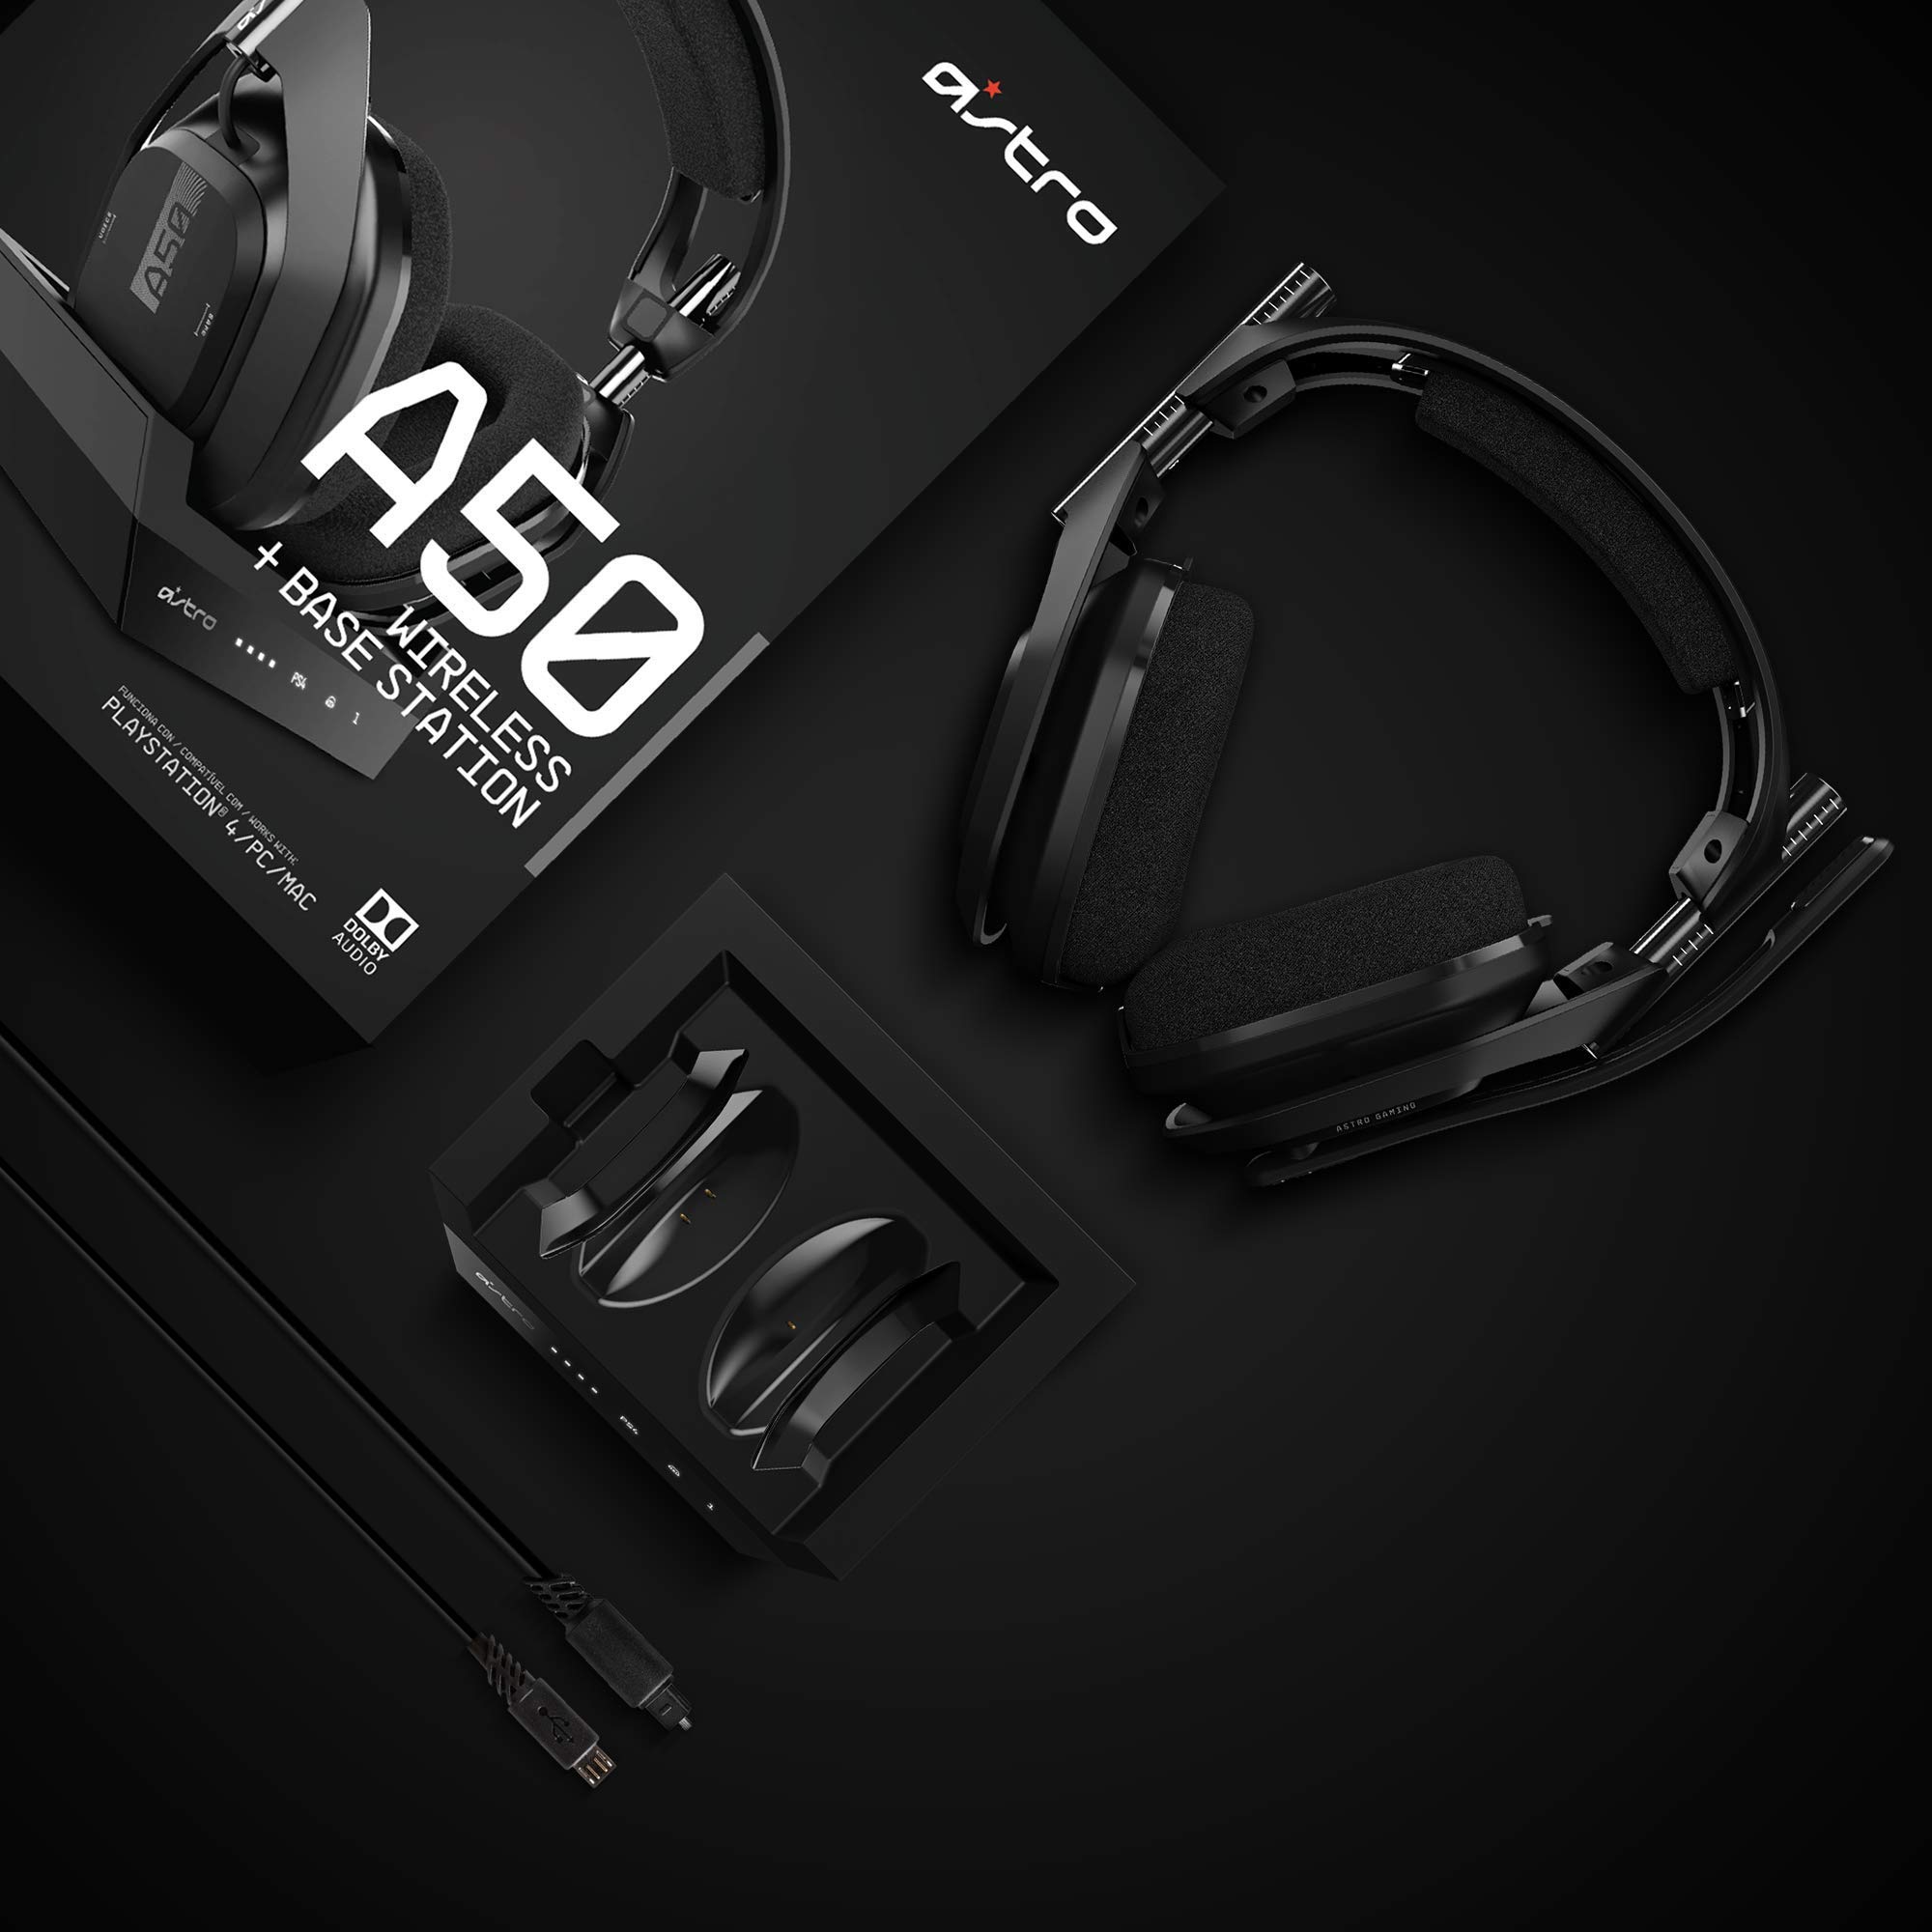 Astro A50 Gen 4 Review - Just